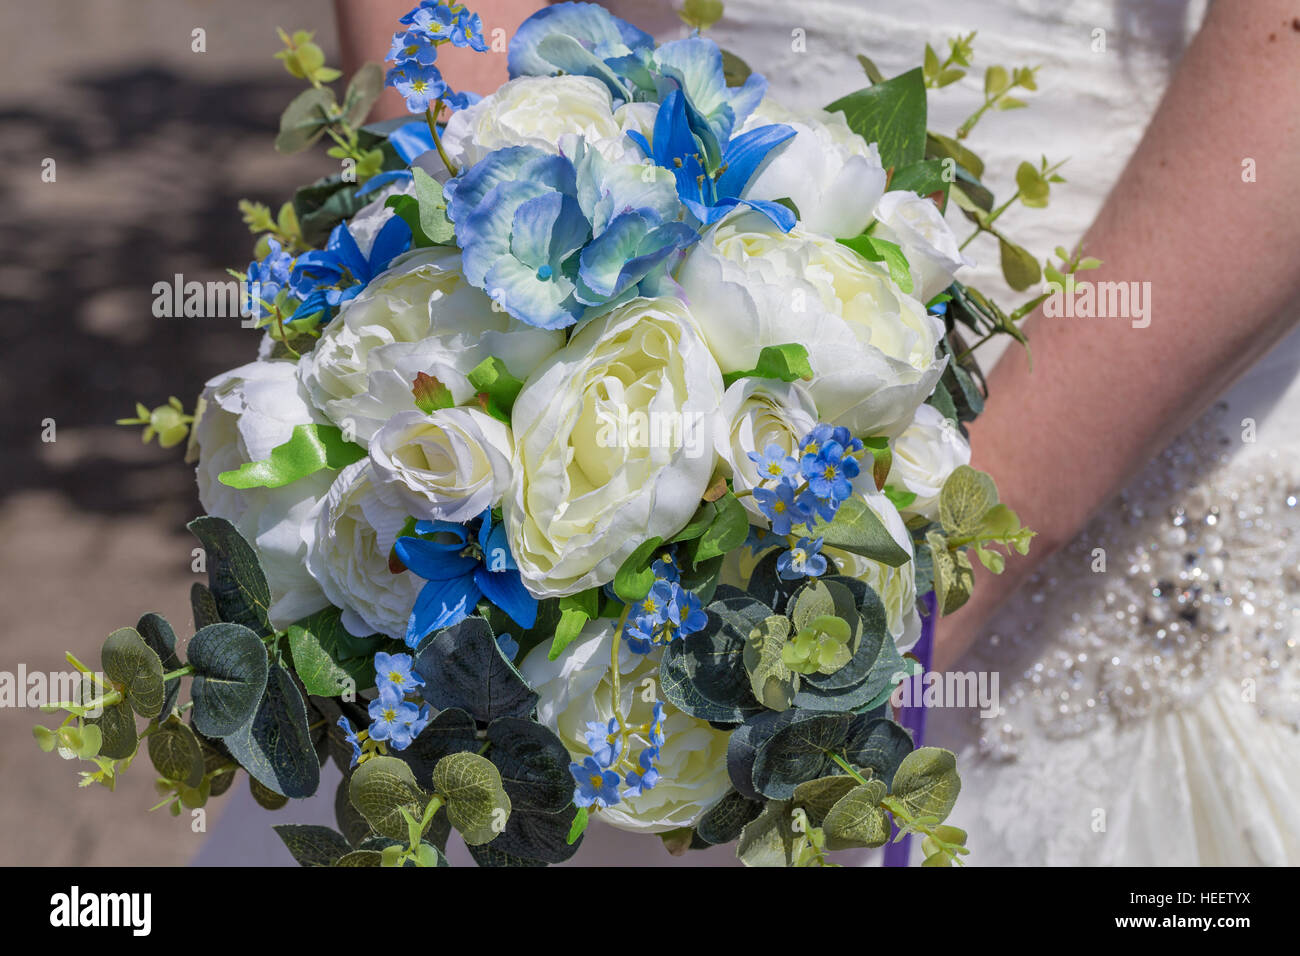 Blue and white bridal bouquet held by bride against traditional white jeweled wedding dress with pearls Stock Photo